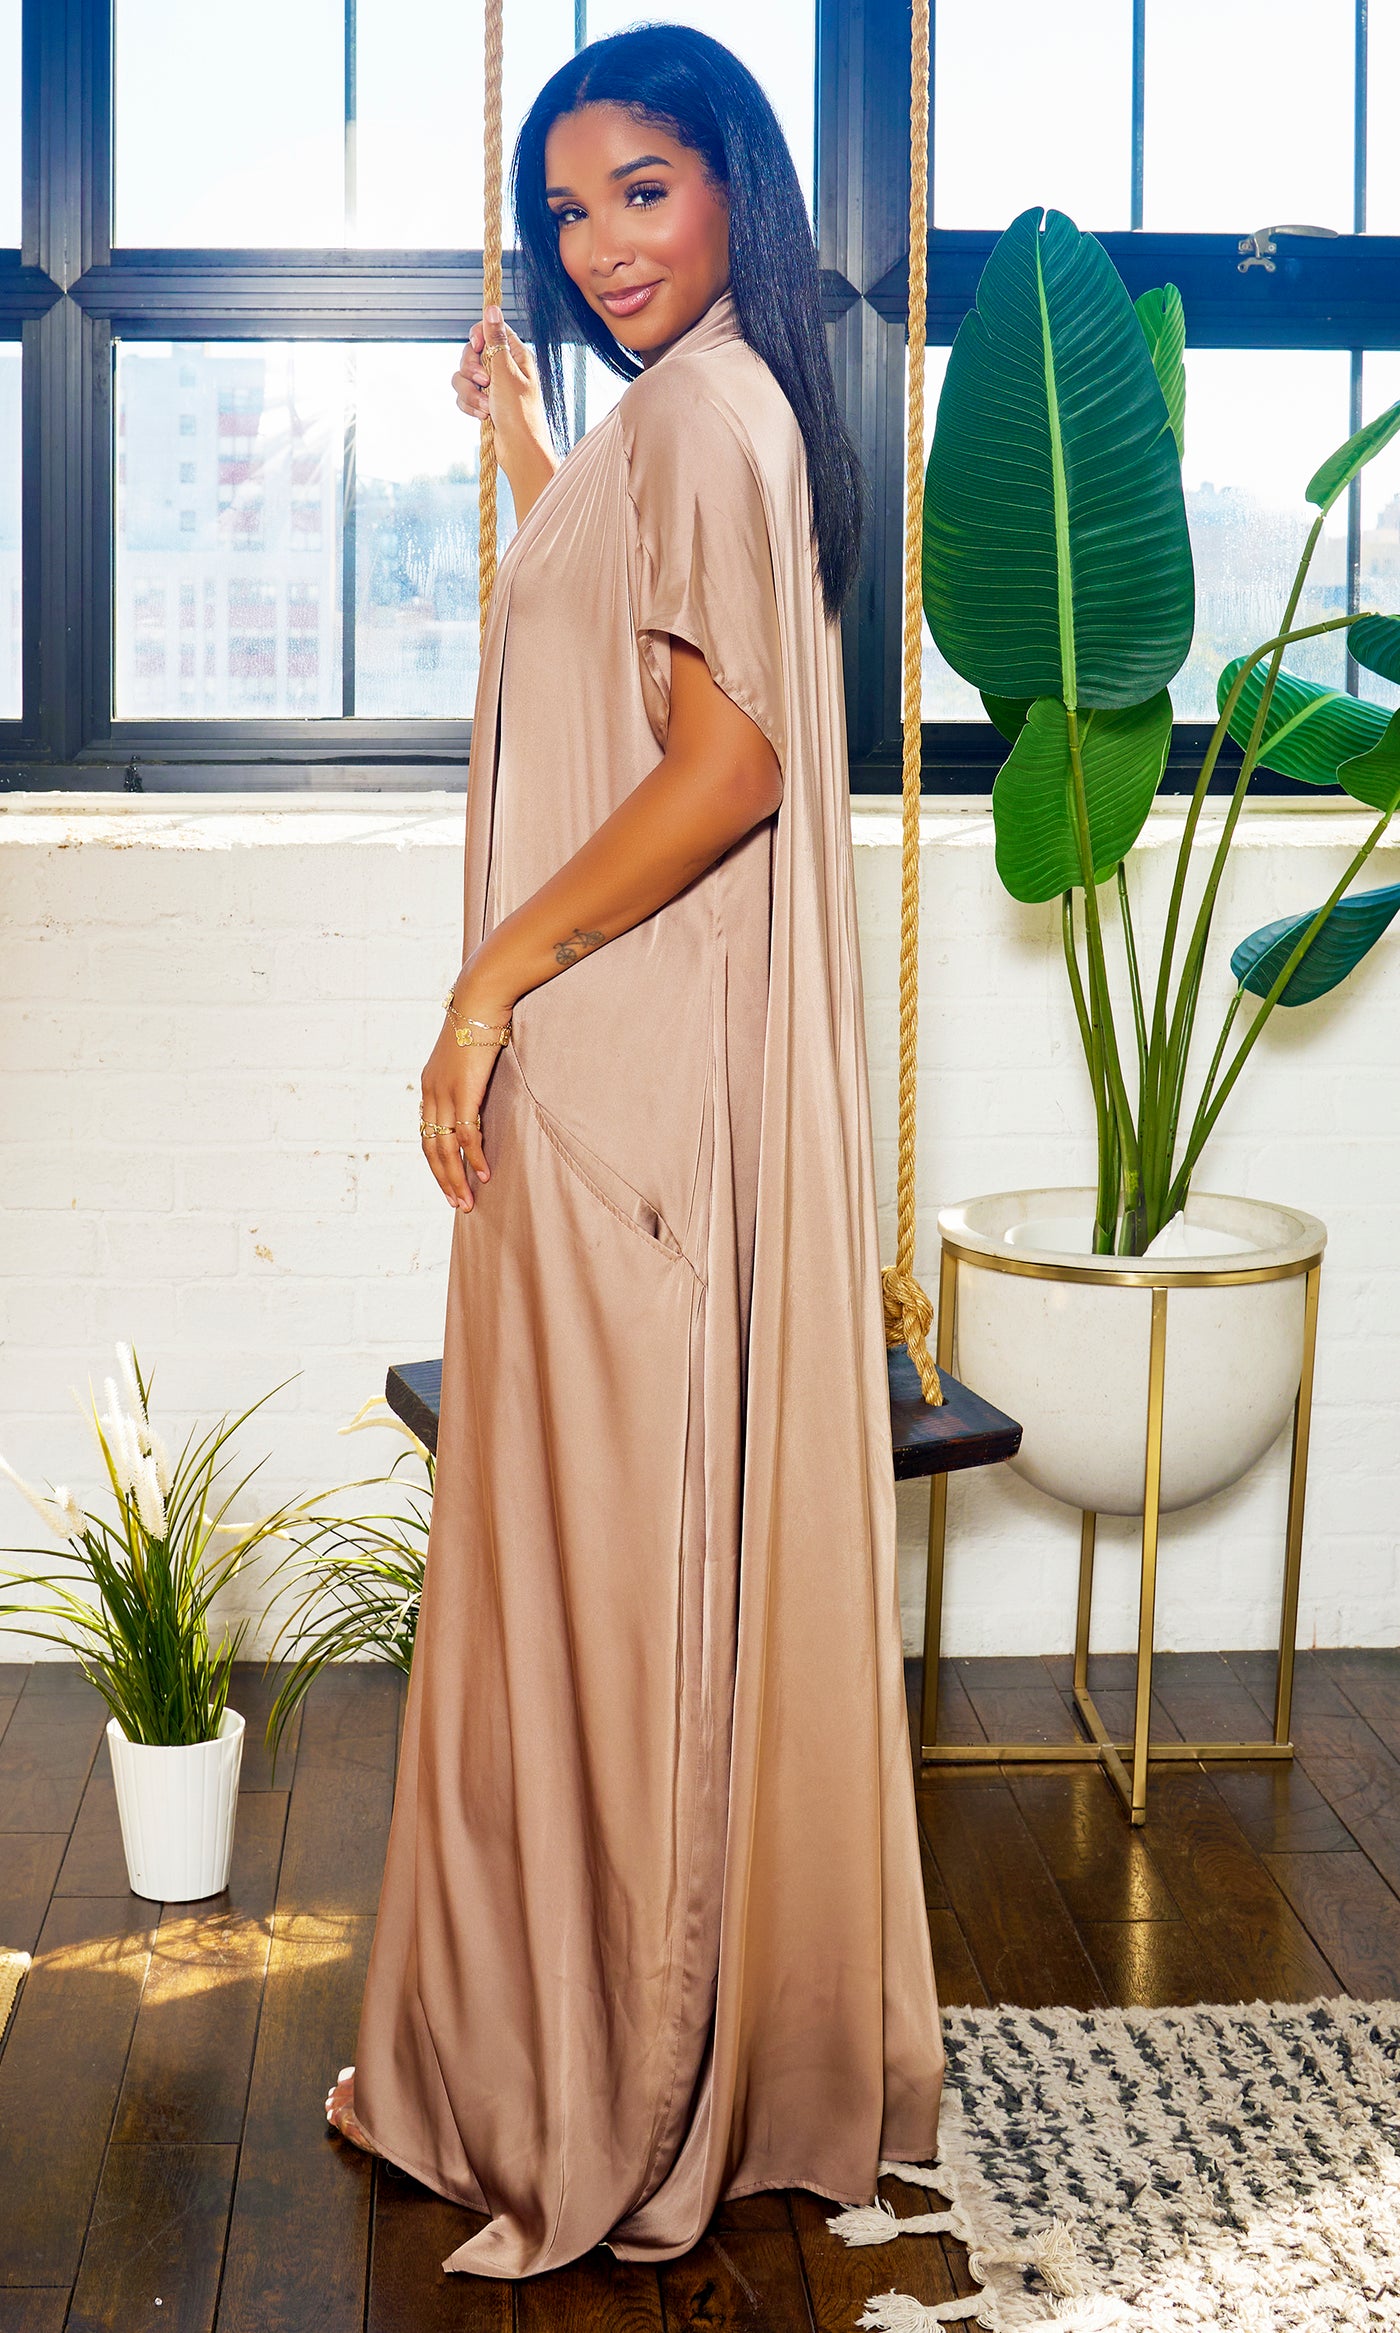 Luxe Drape Loose Fit Jumpsuit - Bronze PREORDER Ships End October - Cutely Covered